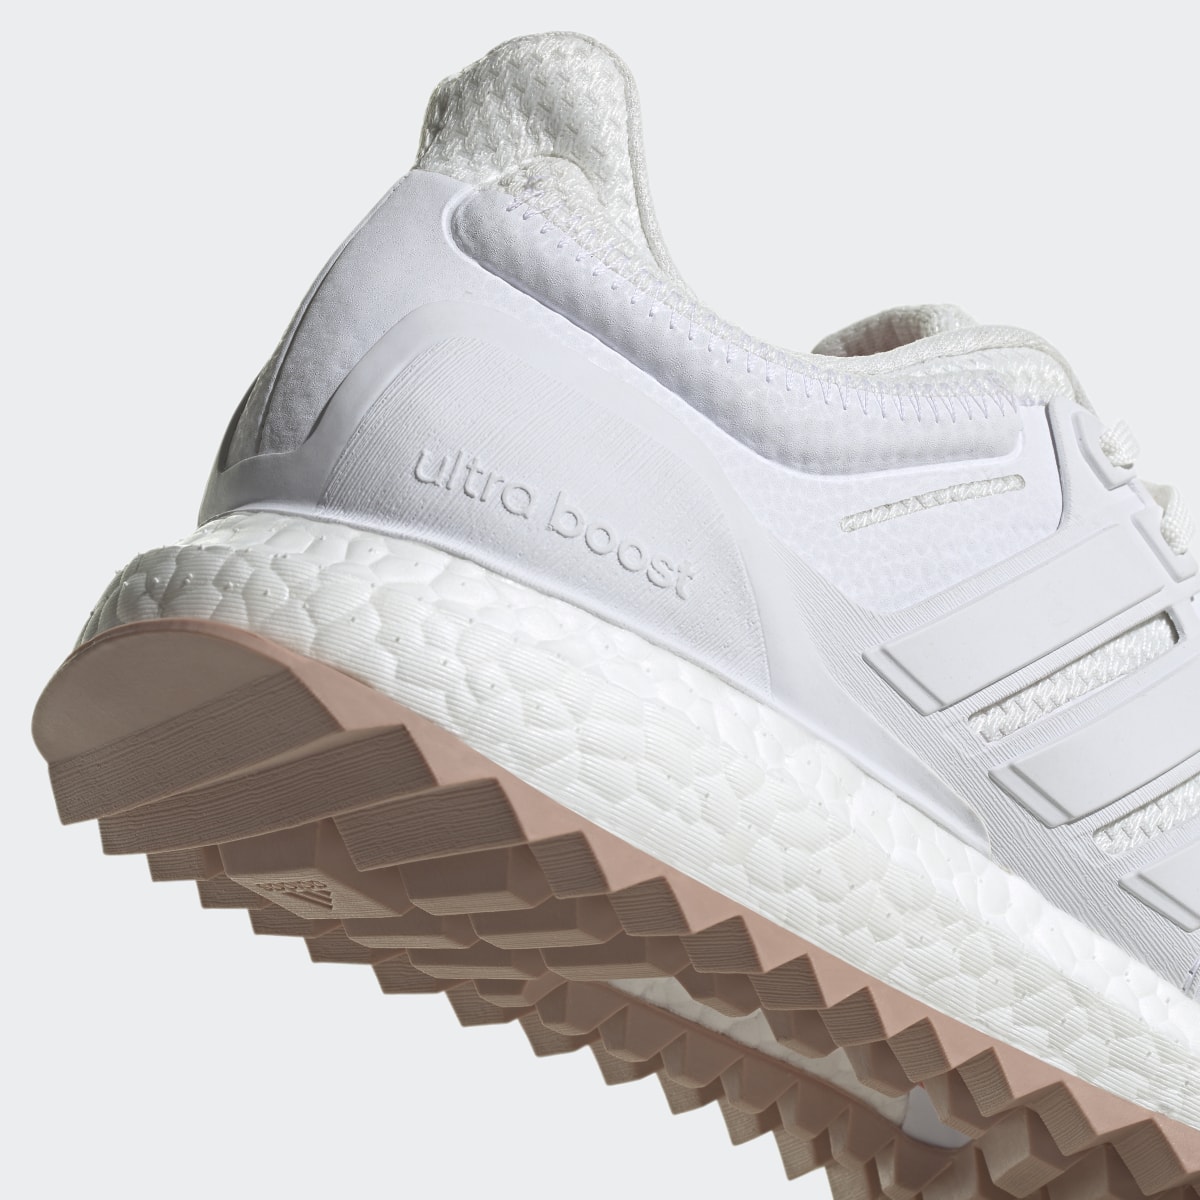 Adidas Ultraboost DNA XXII Lifestyle Running Sportswear Capsule Collection Shoes. 8